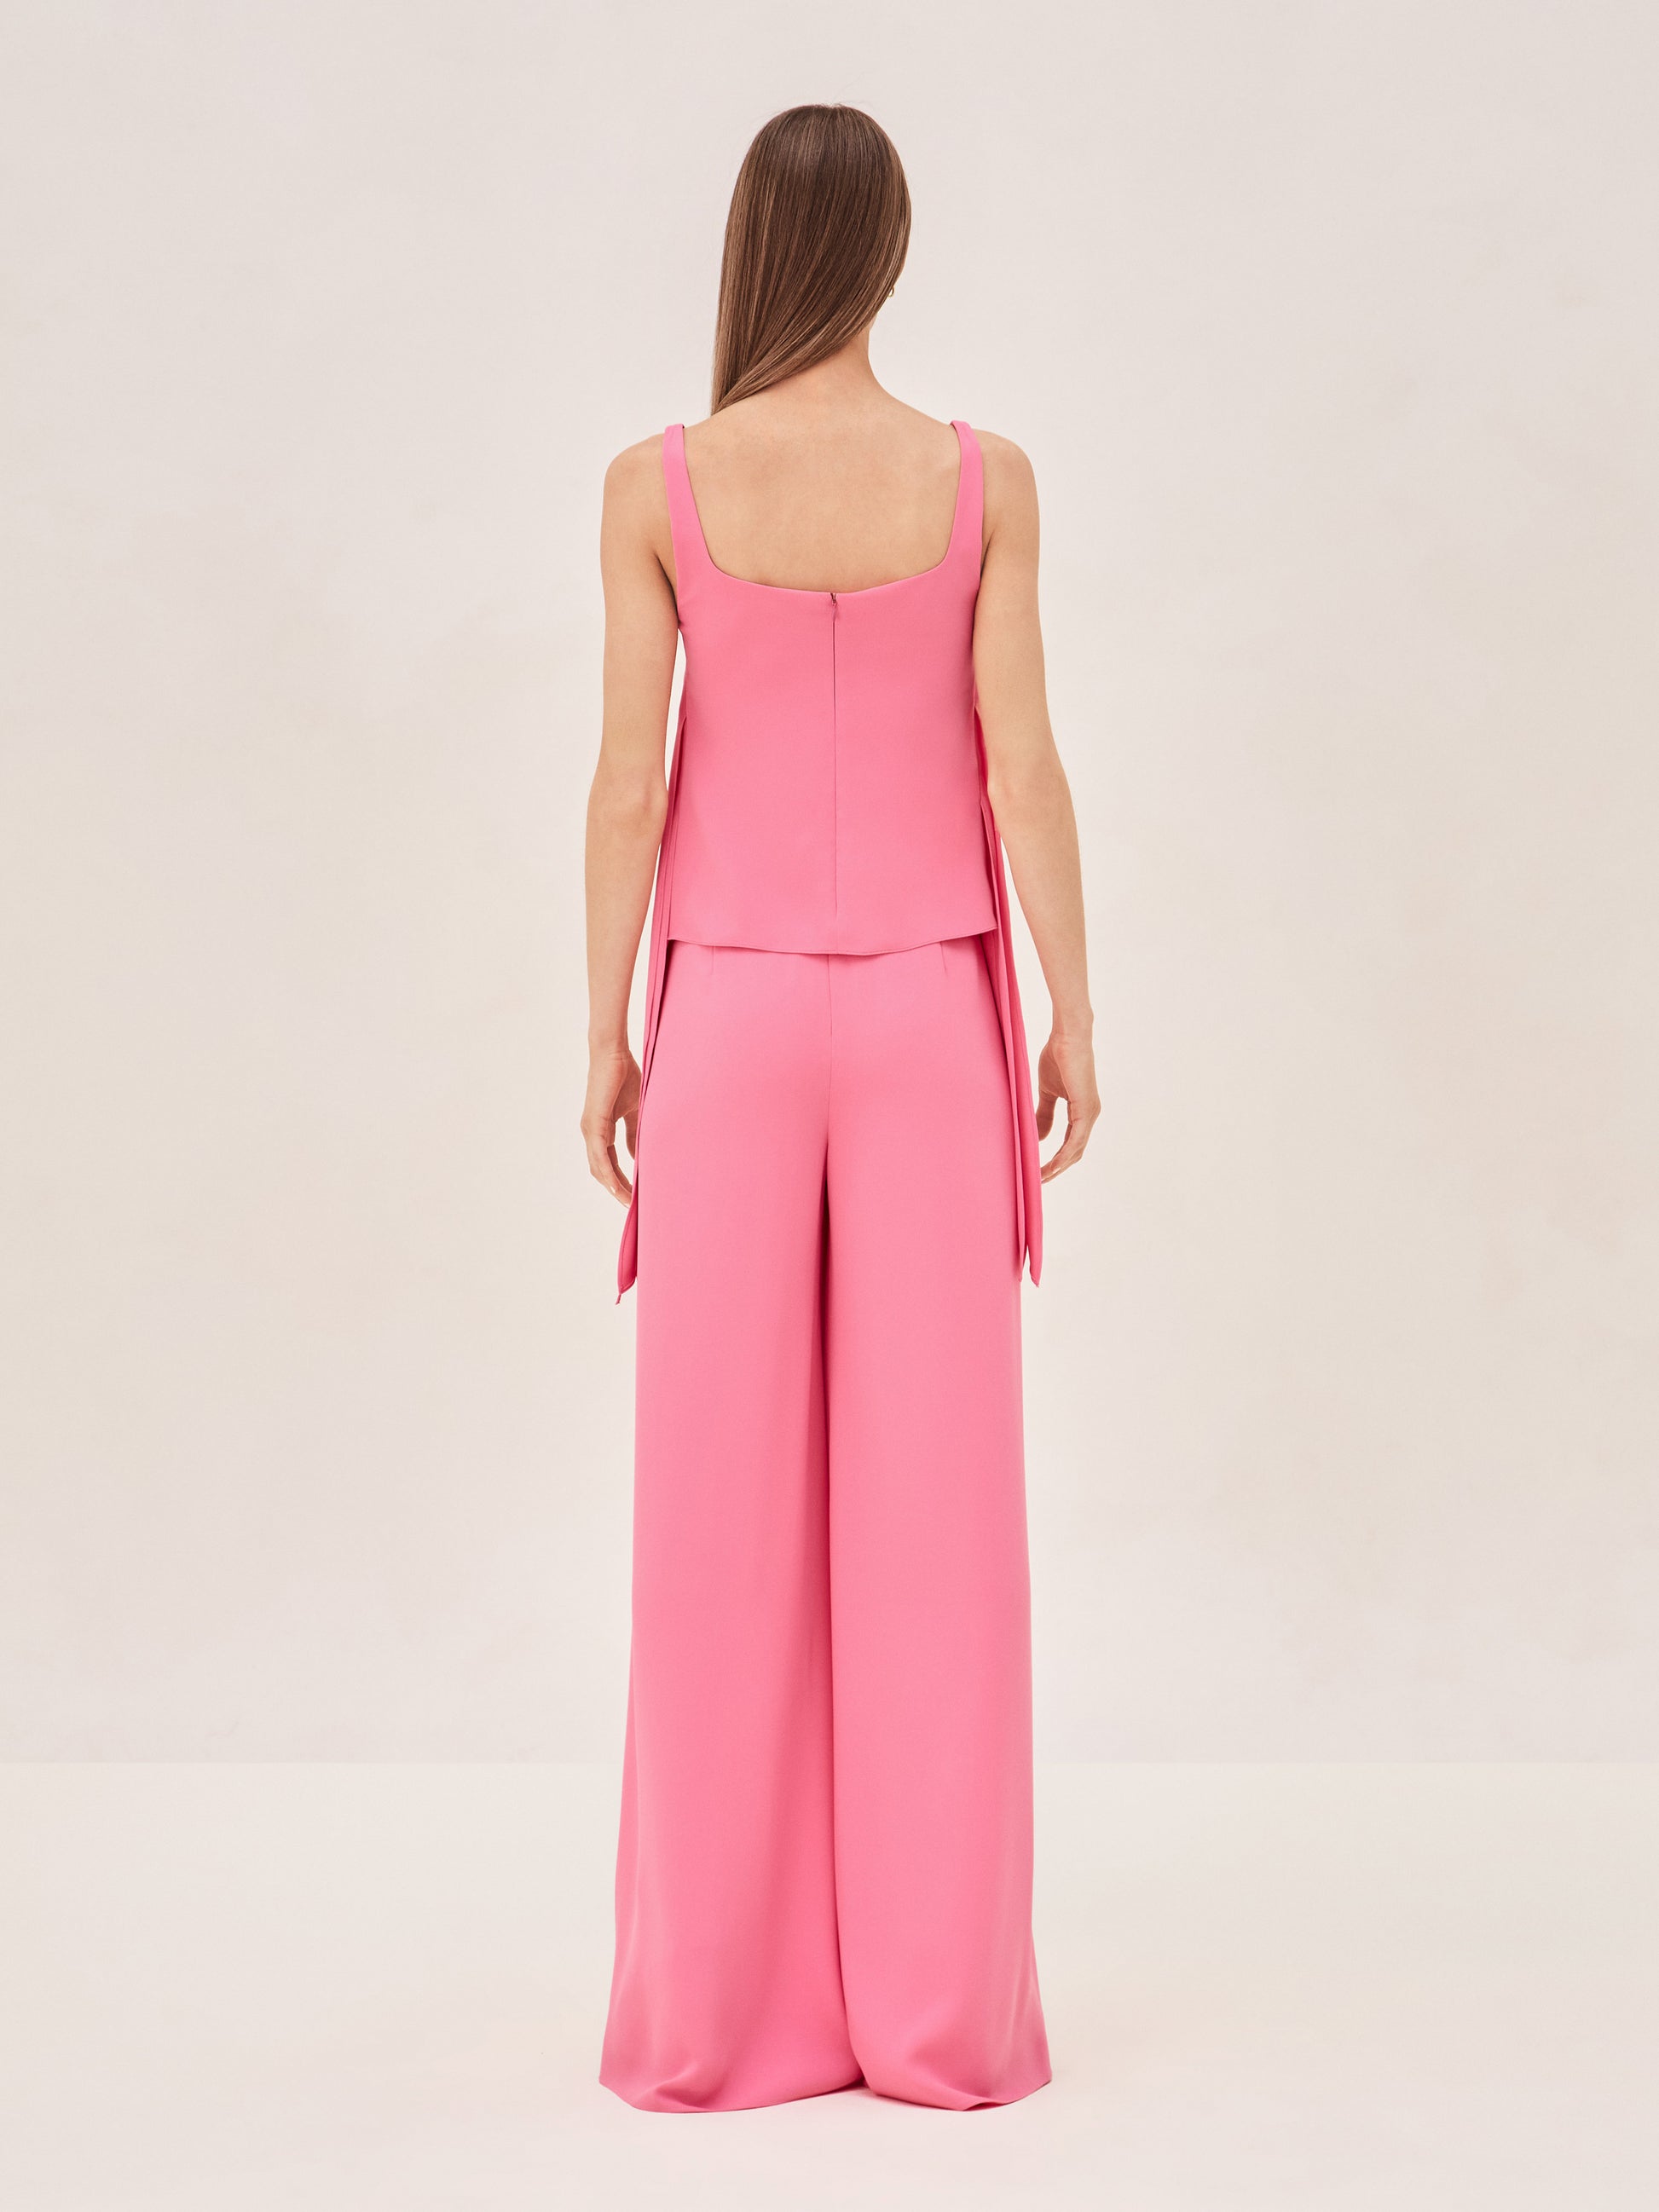 ALEXIS Dinah wide leg pant in pink back image